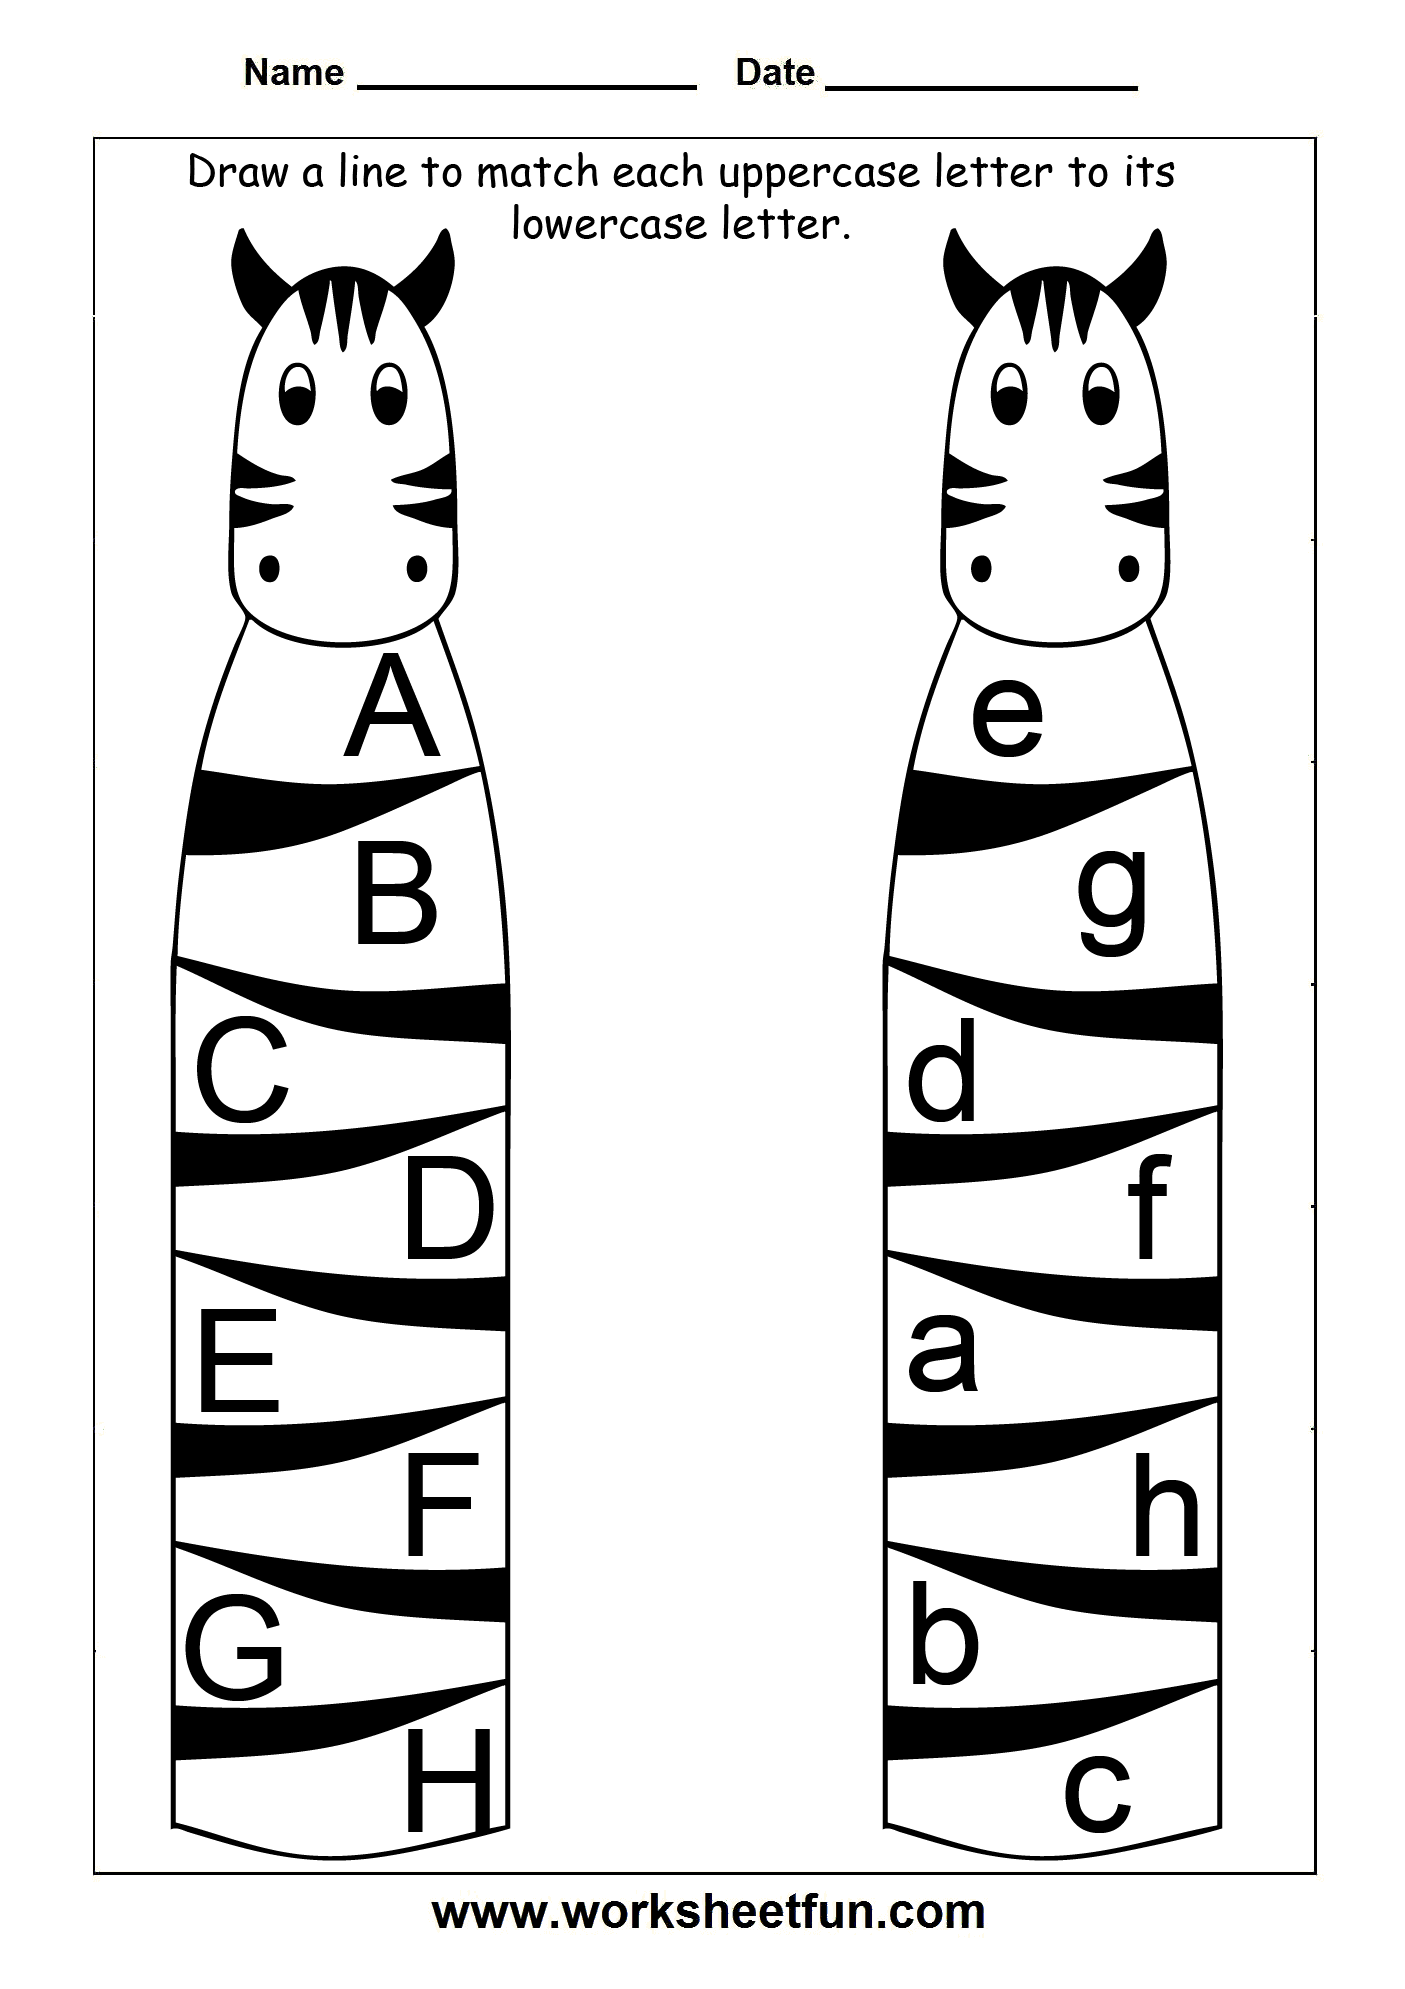 Uppercase and Lowercase Letters Worksheets Image